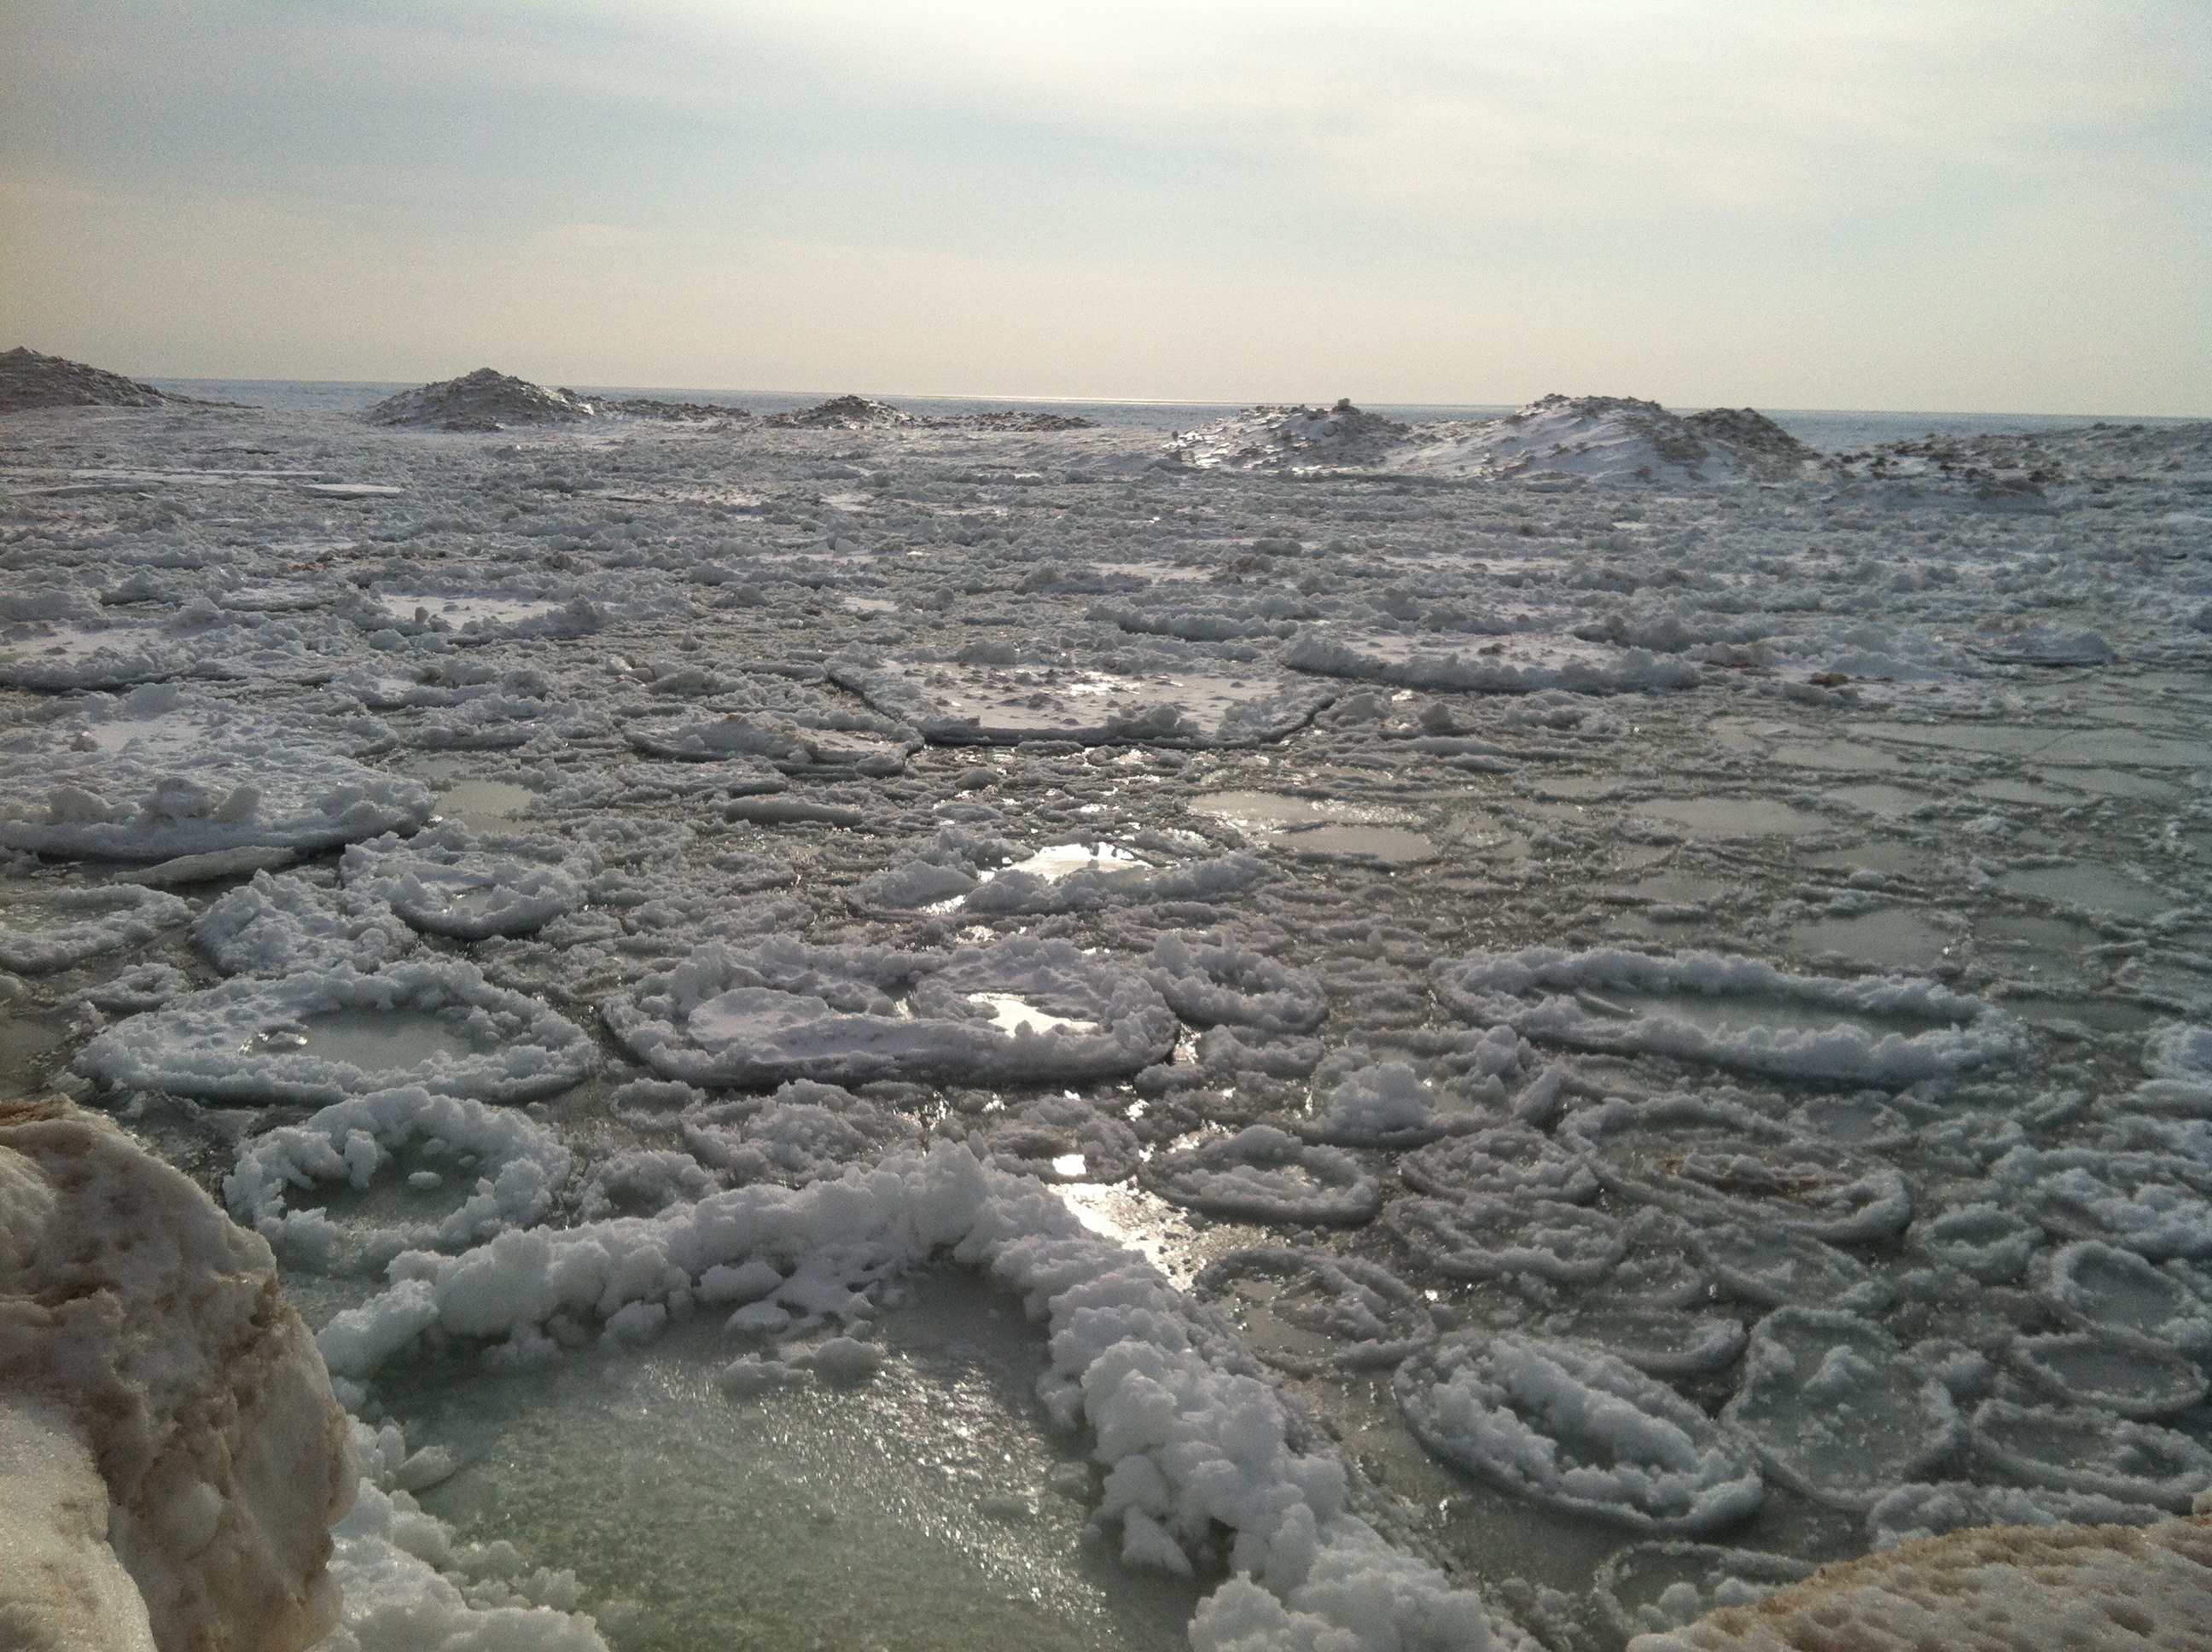 The frozen Lake Michigan with its neat bubble like patches of ice